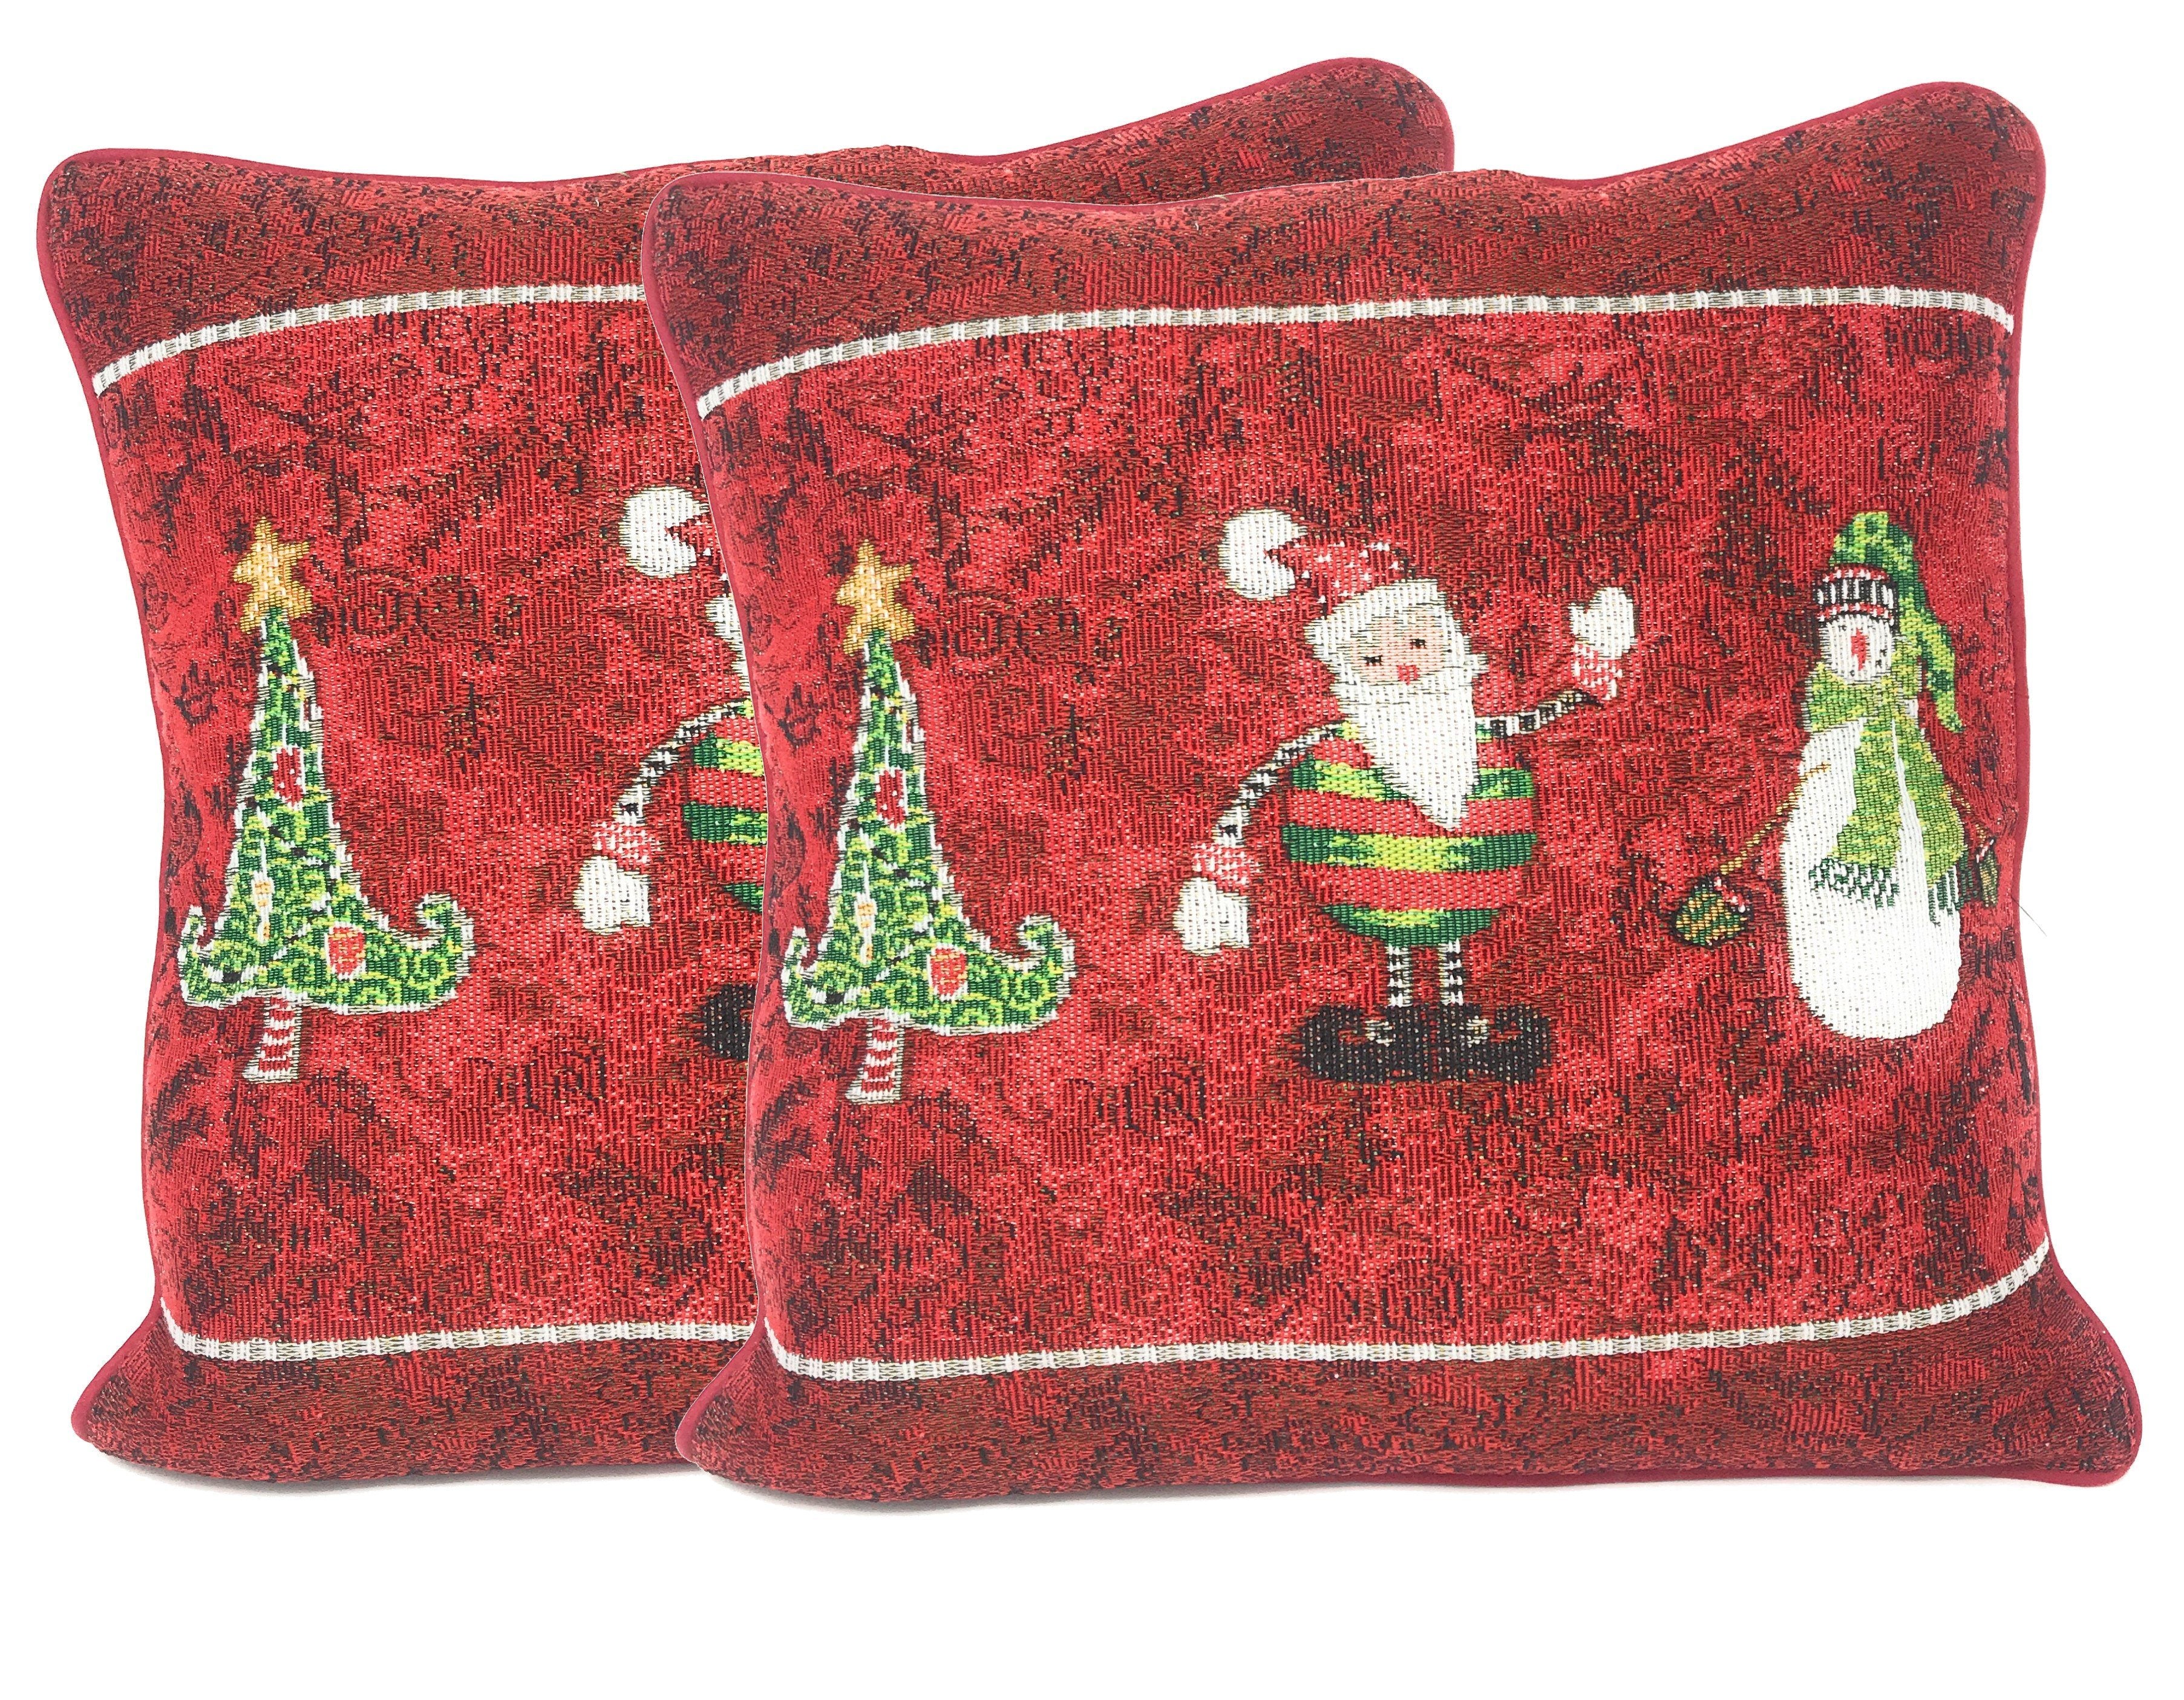 Tache Here Comes Santa Claus Vintage Holiday Woven Tapestry Throw Pillow Cover (8577CC) - Tache Home Fashion